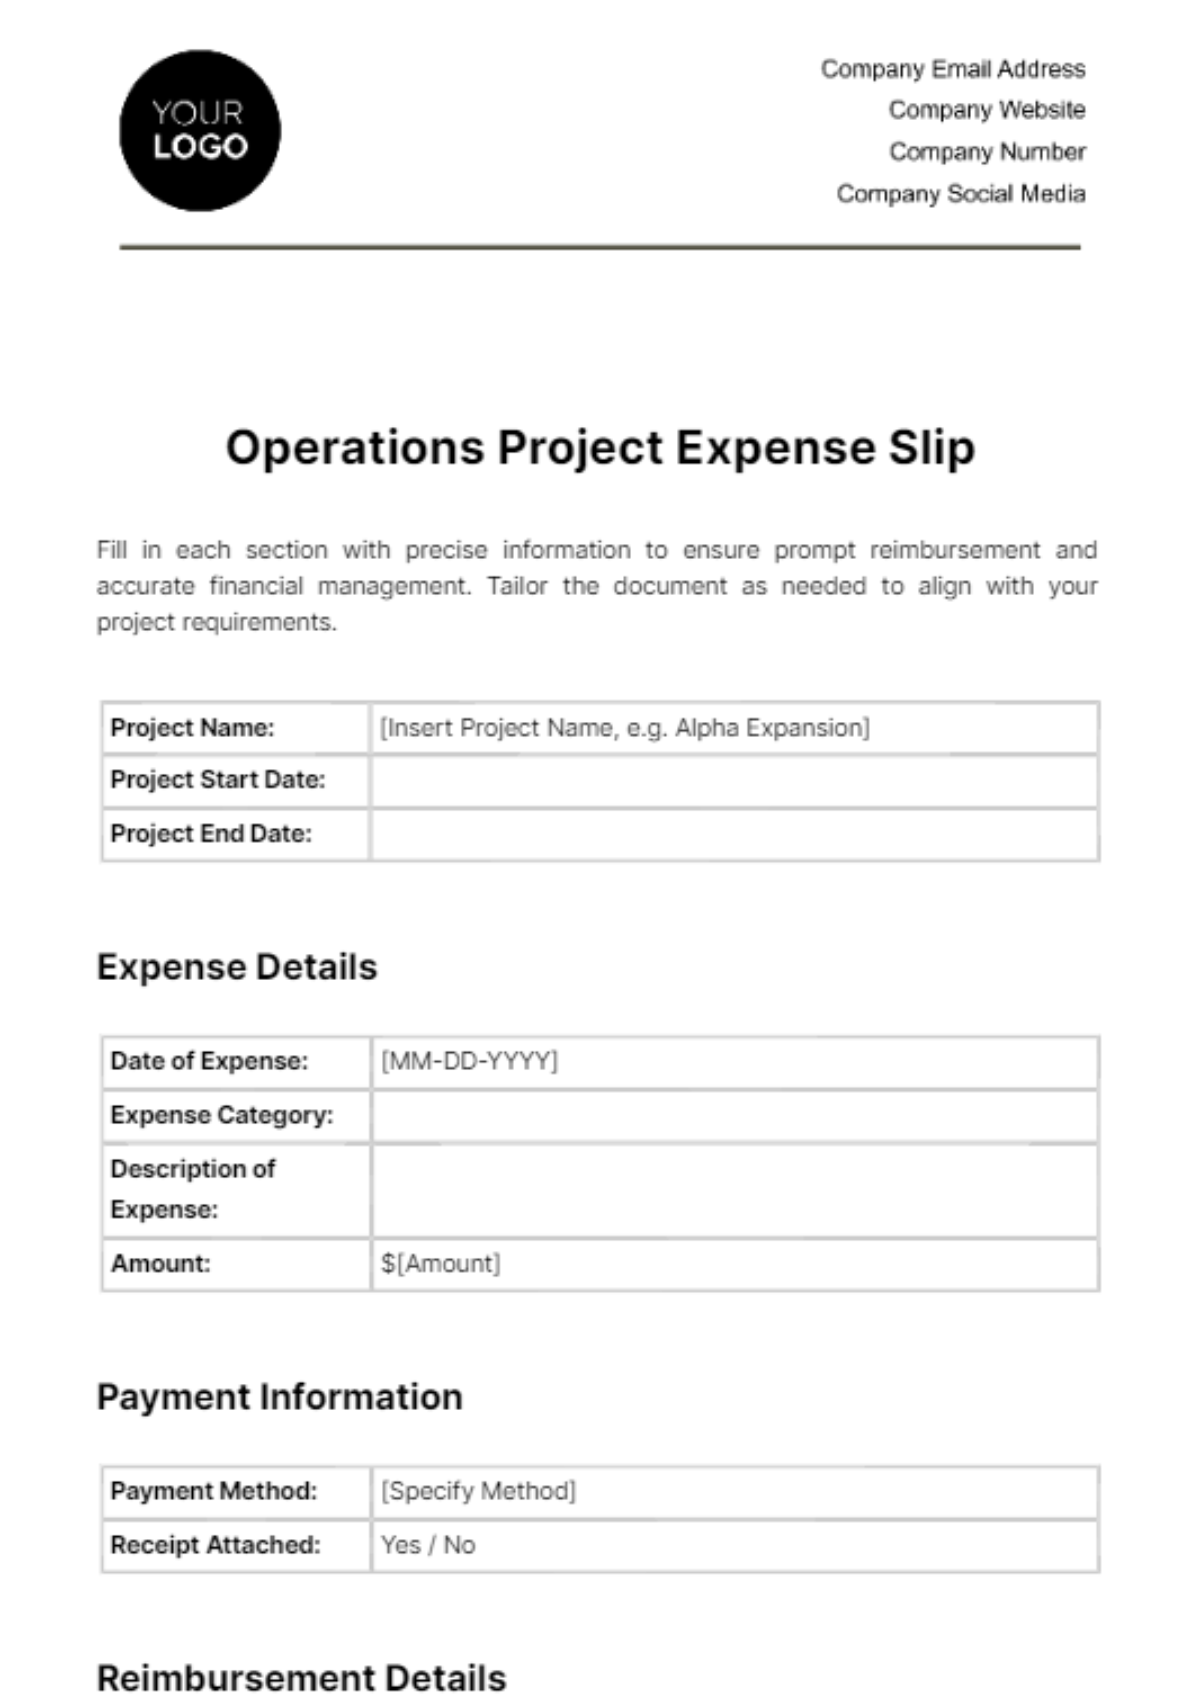 Operations Project Expense Slip Template